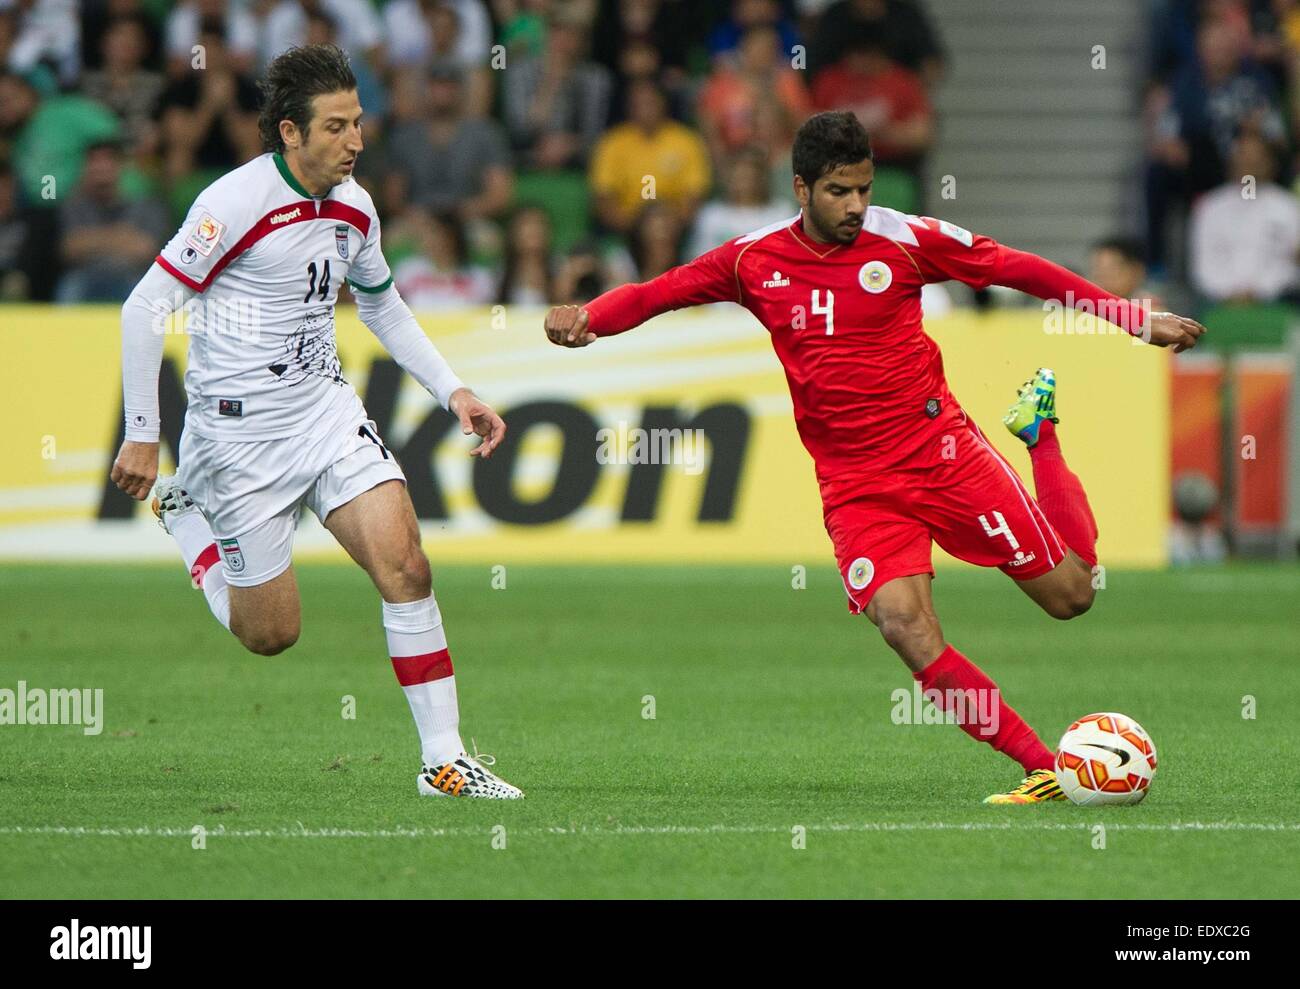 (150111) -- MELBOURNE, Jan. 11, 2015 (Xinhua) -- Andranik Teymourian (L) of Iran vies with Sayed Dhiya Shubbar of Bahrain during a Group C match at the AFC Asian Cup in Melbourne, Australia, Jan. 11, 2015. Iran won 2-0. (Xinhua/Bai Xue) Stock Photo